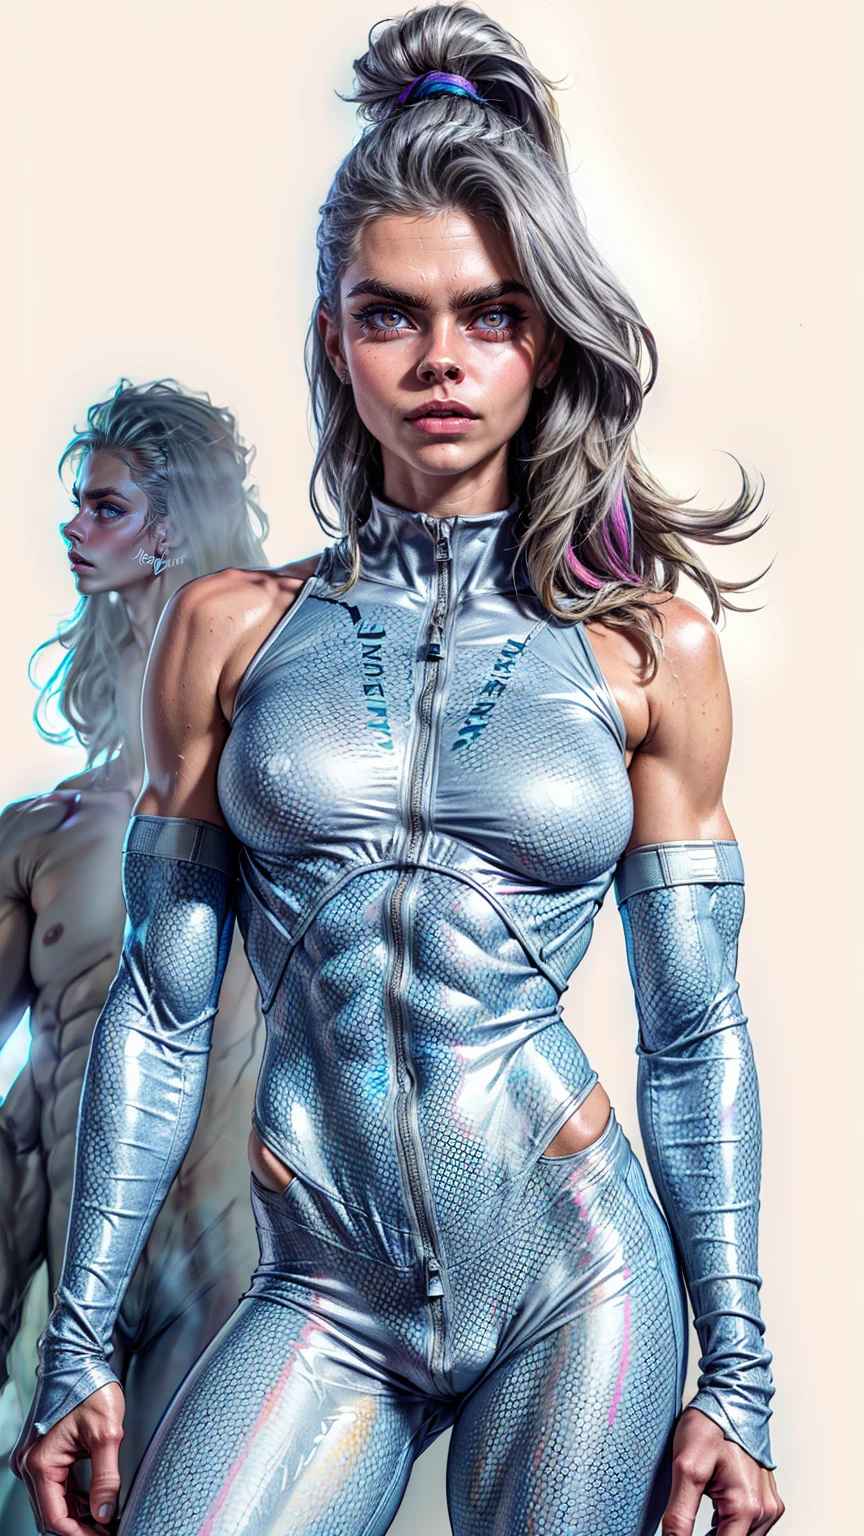 (1 girl), (cara delevingne), Drawing of female fitness model, toned body, feminine, huge upper body, torso shot, wide shoulders, veins, beautiful face, full lips, slim face, high cheekbones,(best quality, highres, ultra-detailed, realistic), muscular arms, defined abs, confident expression, silver gray light bodysuit, intense gaze, vibrant colors, dynamic lighting, mixed media artwork, blank background